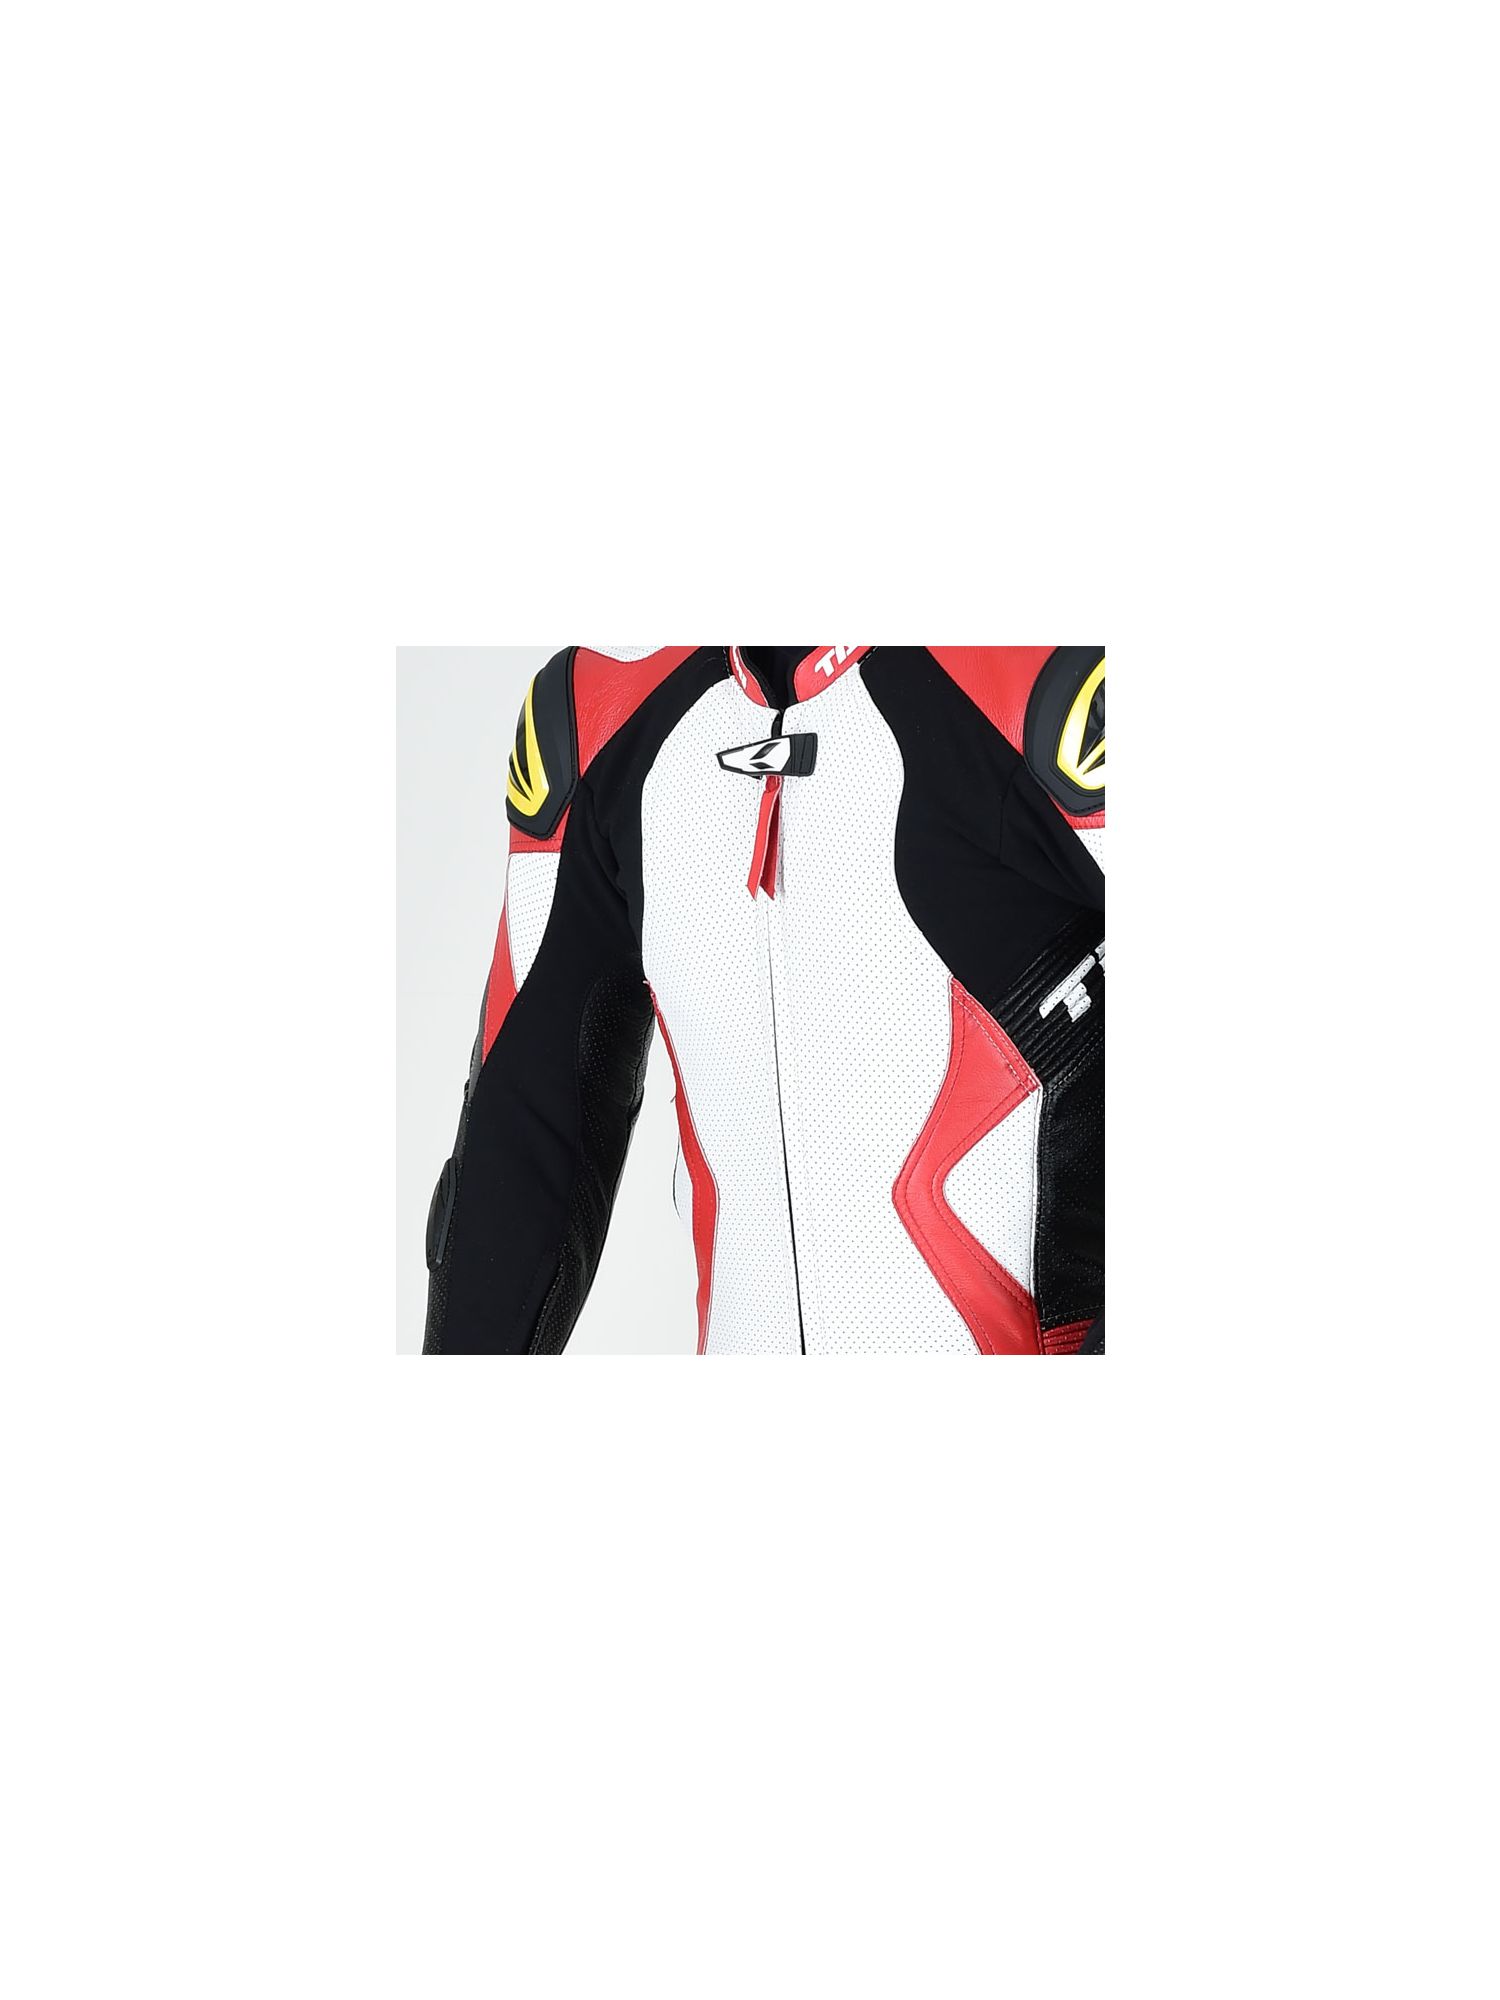 NXL103 | GP-MAX R103 LEATHER SUIT［3colors］